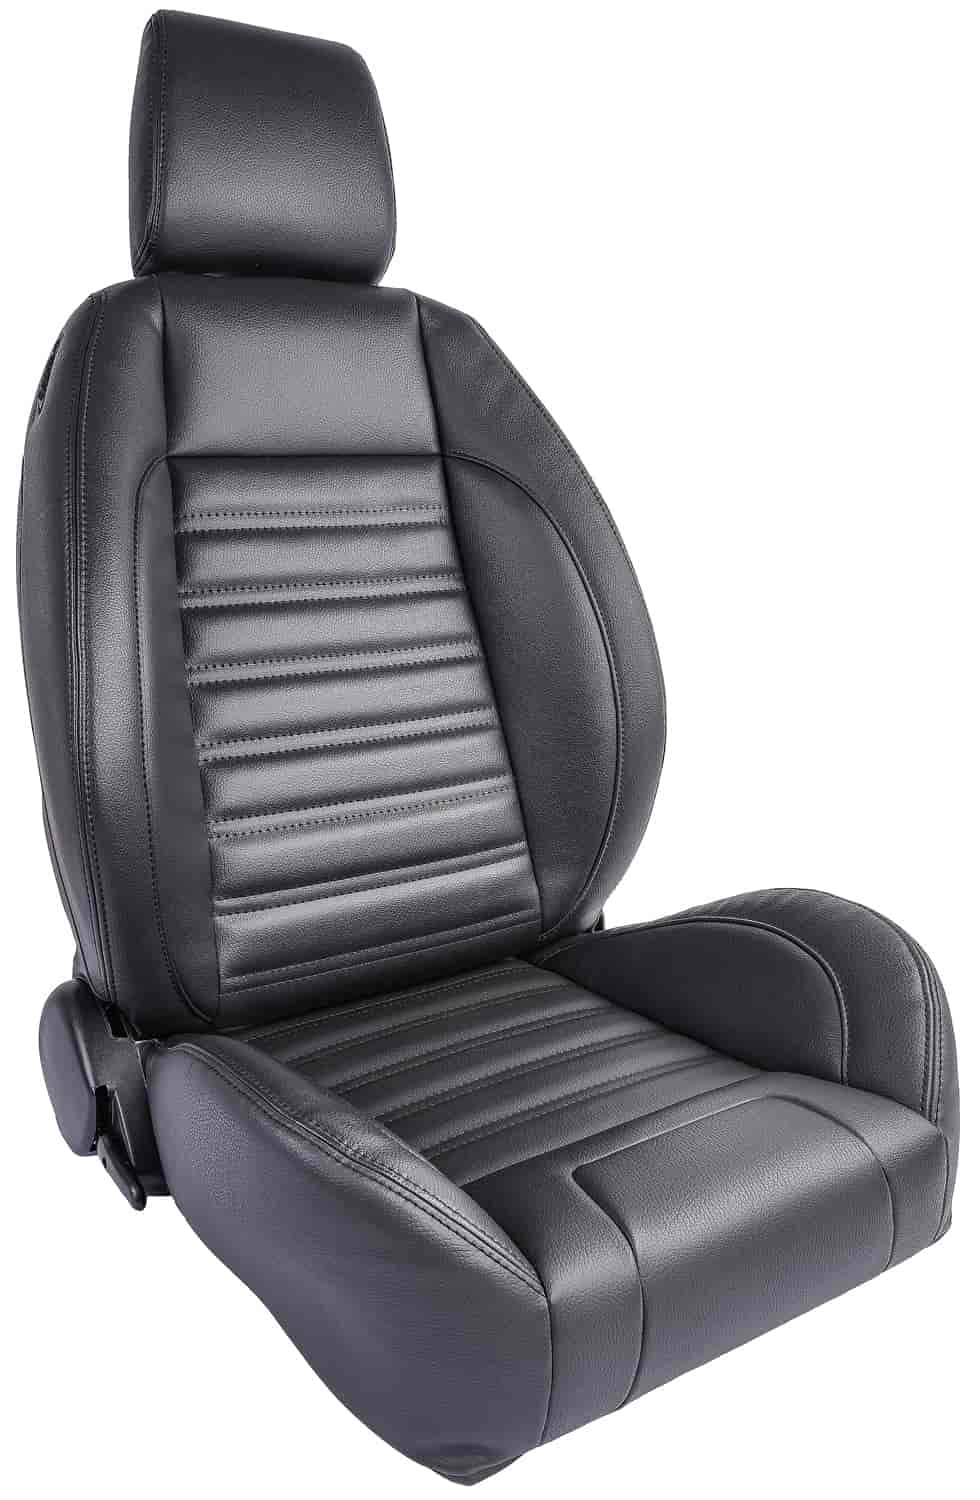 Pro Series Low Back Seat with Headrest Right